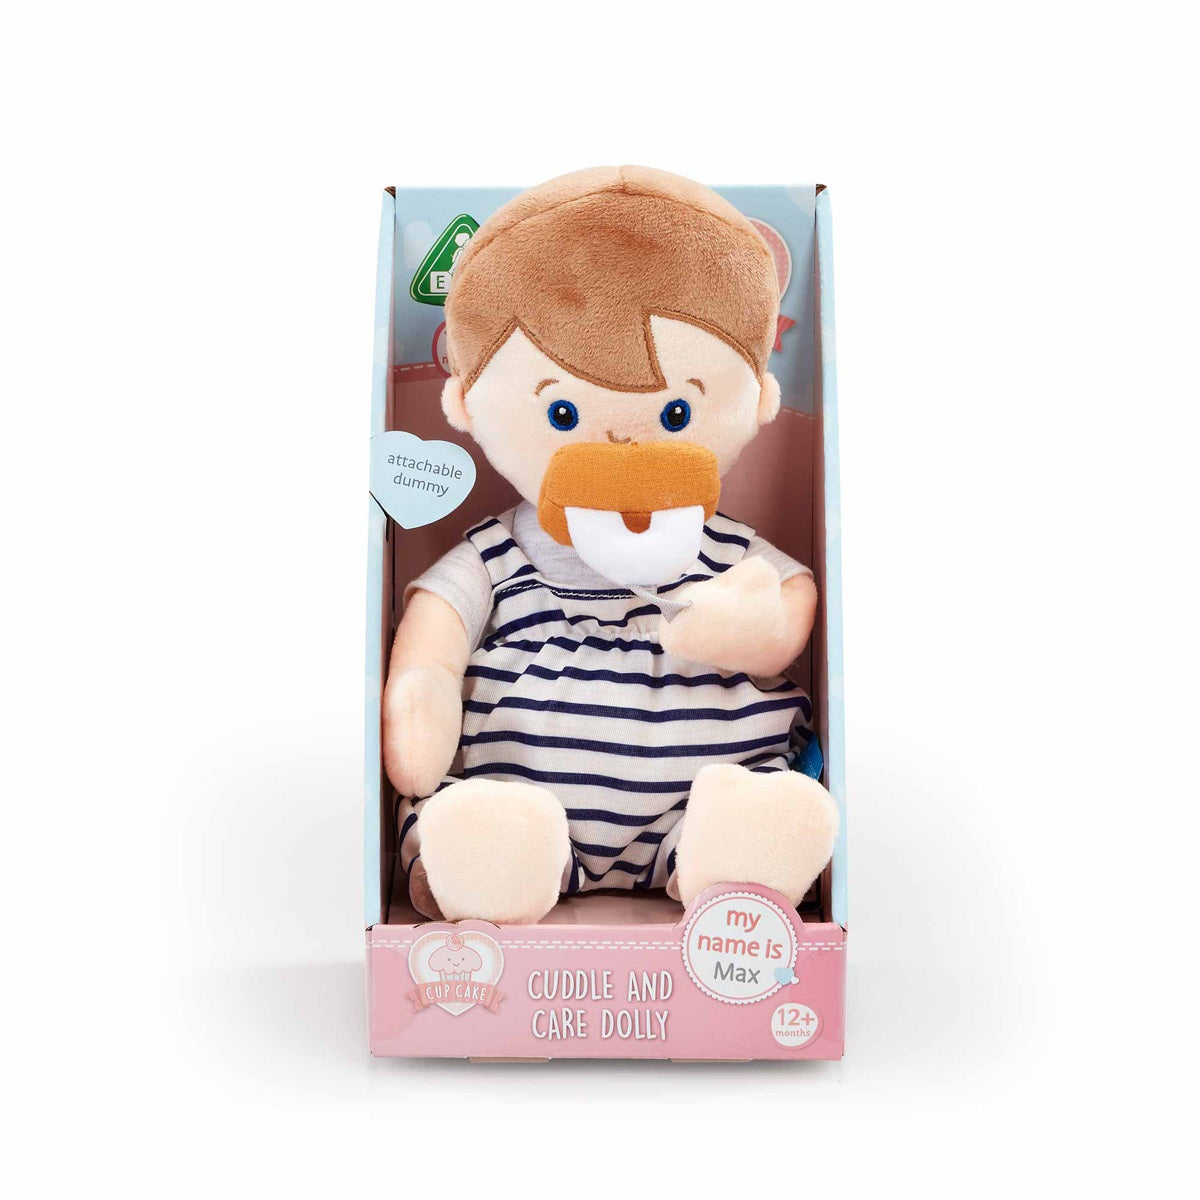 Cupcake Cuddle and Care Dolly Max Baby Doll